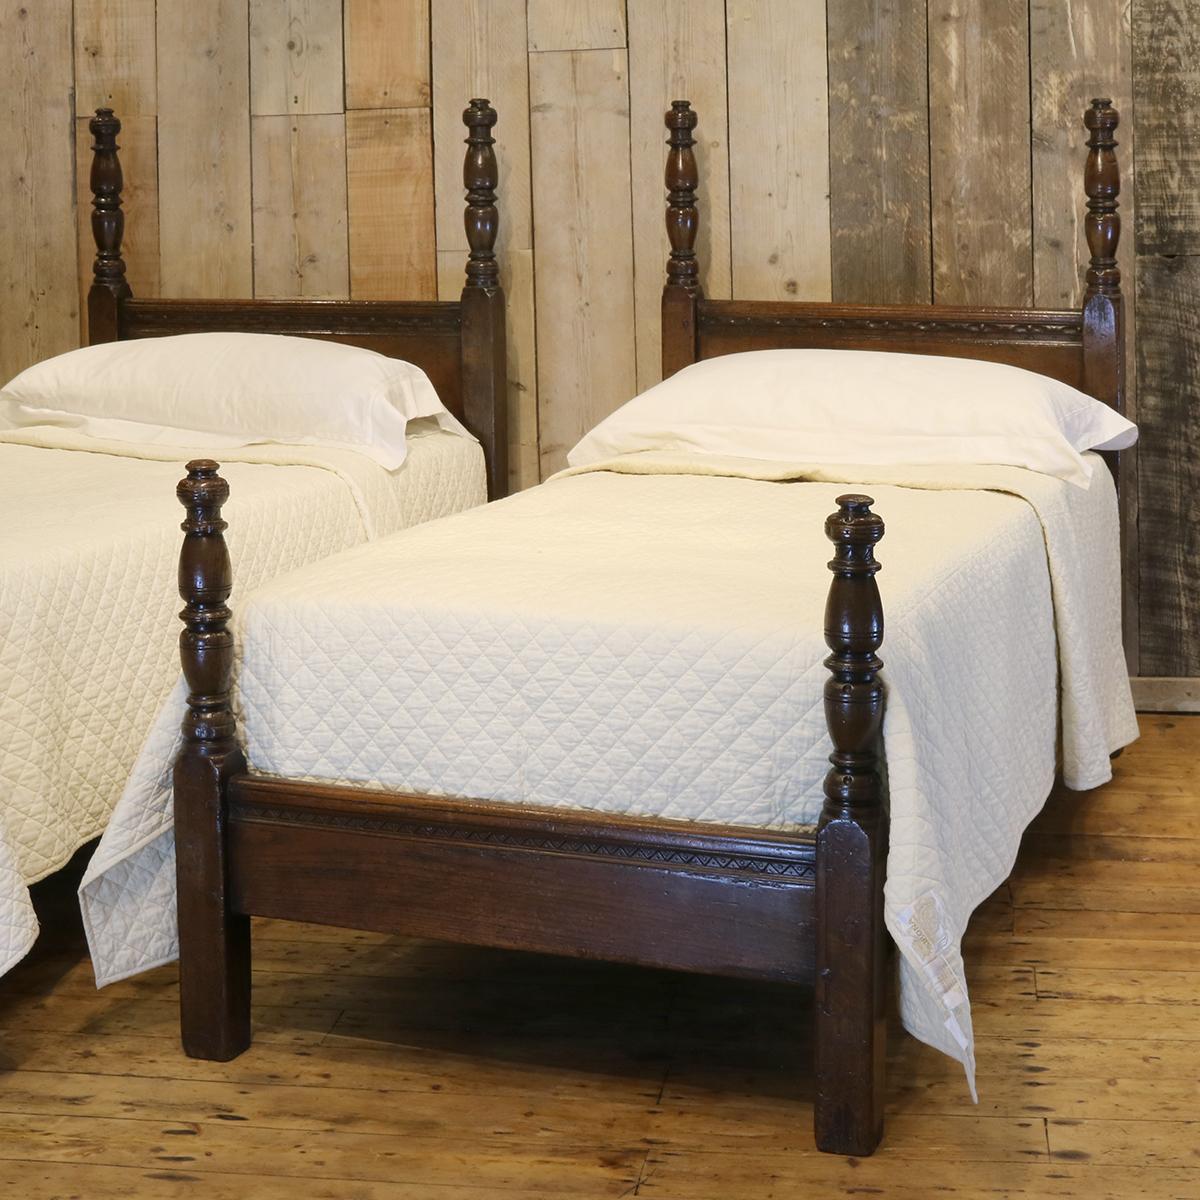 Matching pair of oak beds with plain panels and tall spindle posts.

These beds accept 3ft wide (36 inches) bases and mattresses. They can be any length required (75 inches, 78 inches or more) and can stand together to form an extra wide bed if